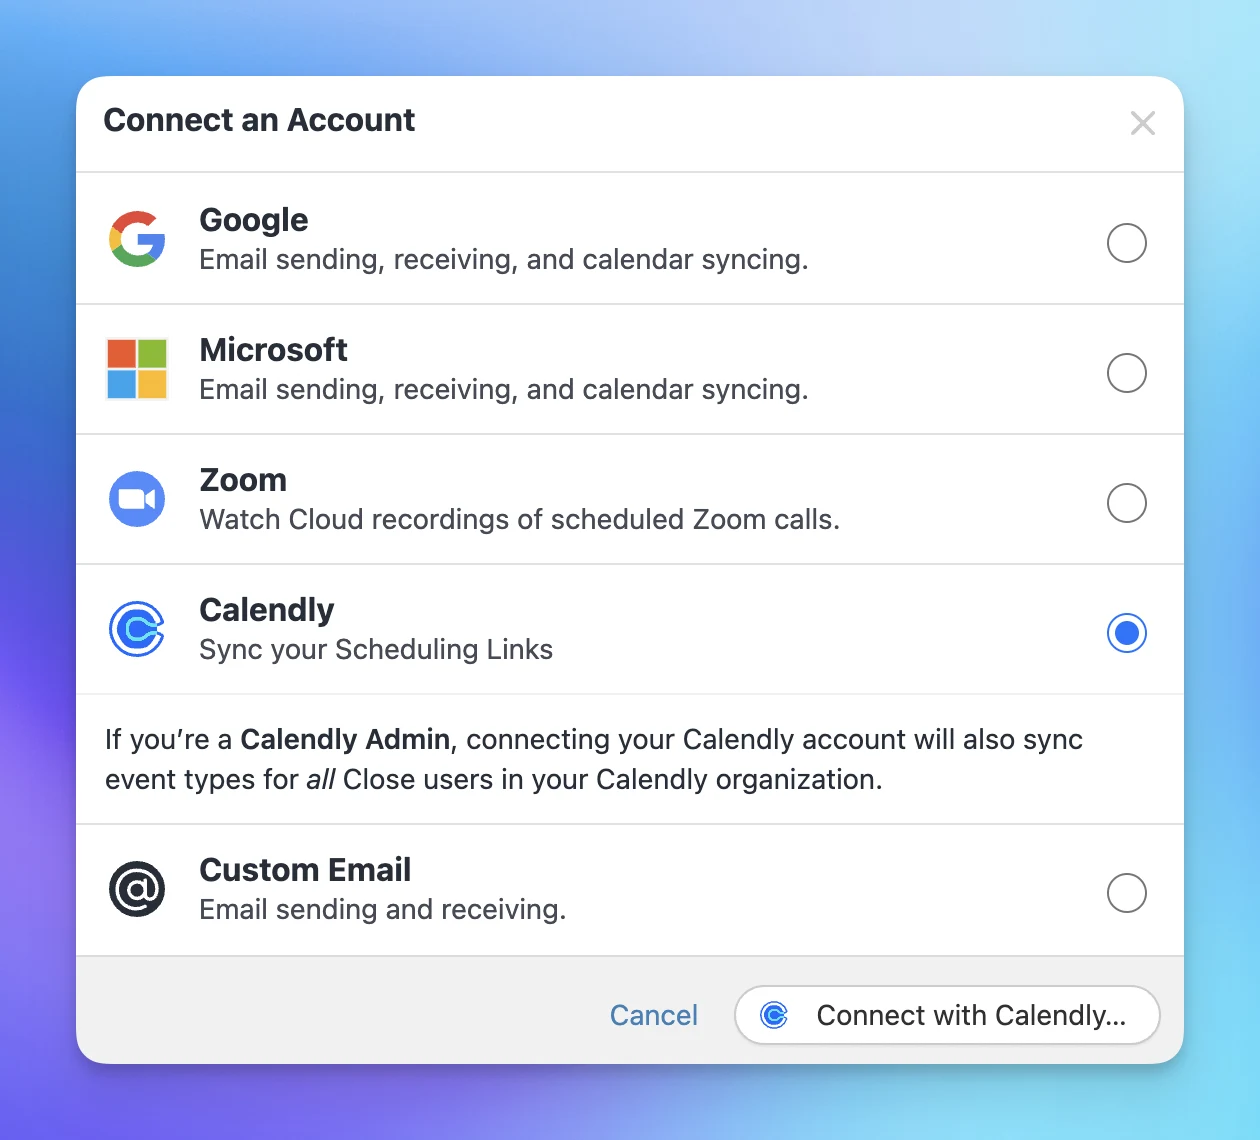 Screenshot of the Close CRM "Connected Accounts" settings page. "Calendly - Sync Your Scheduling Links" is selected.